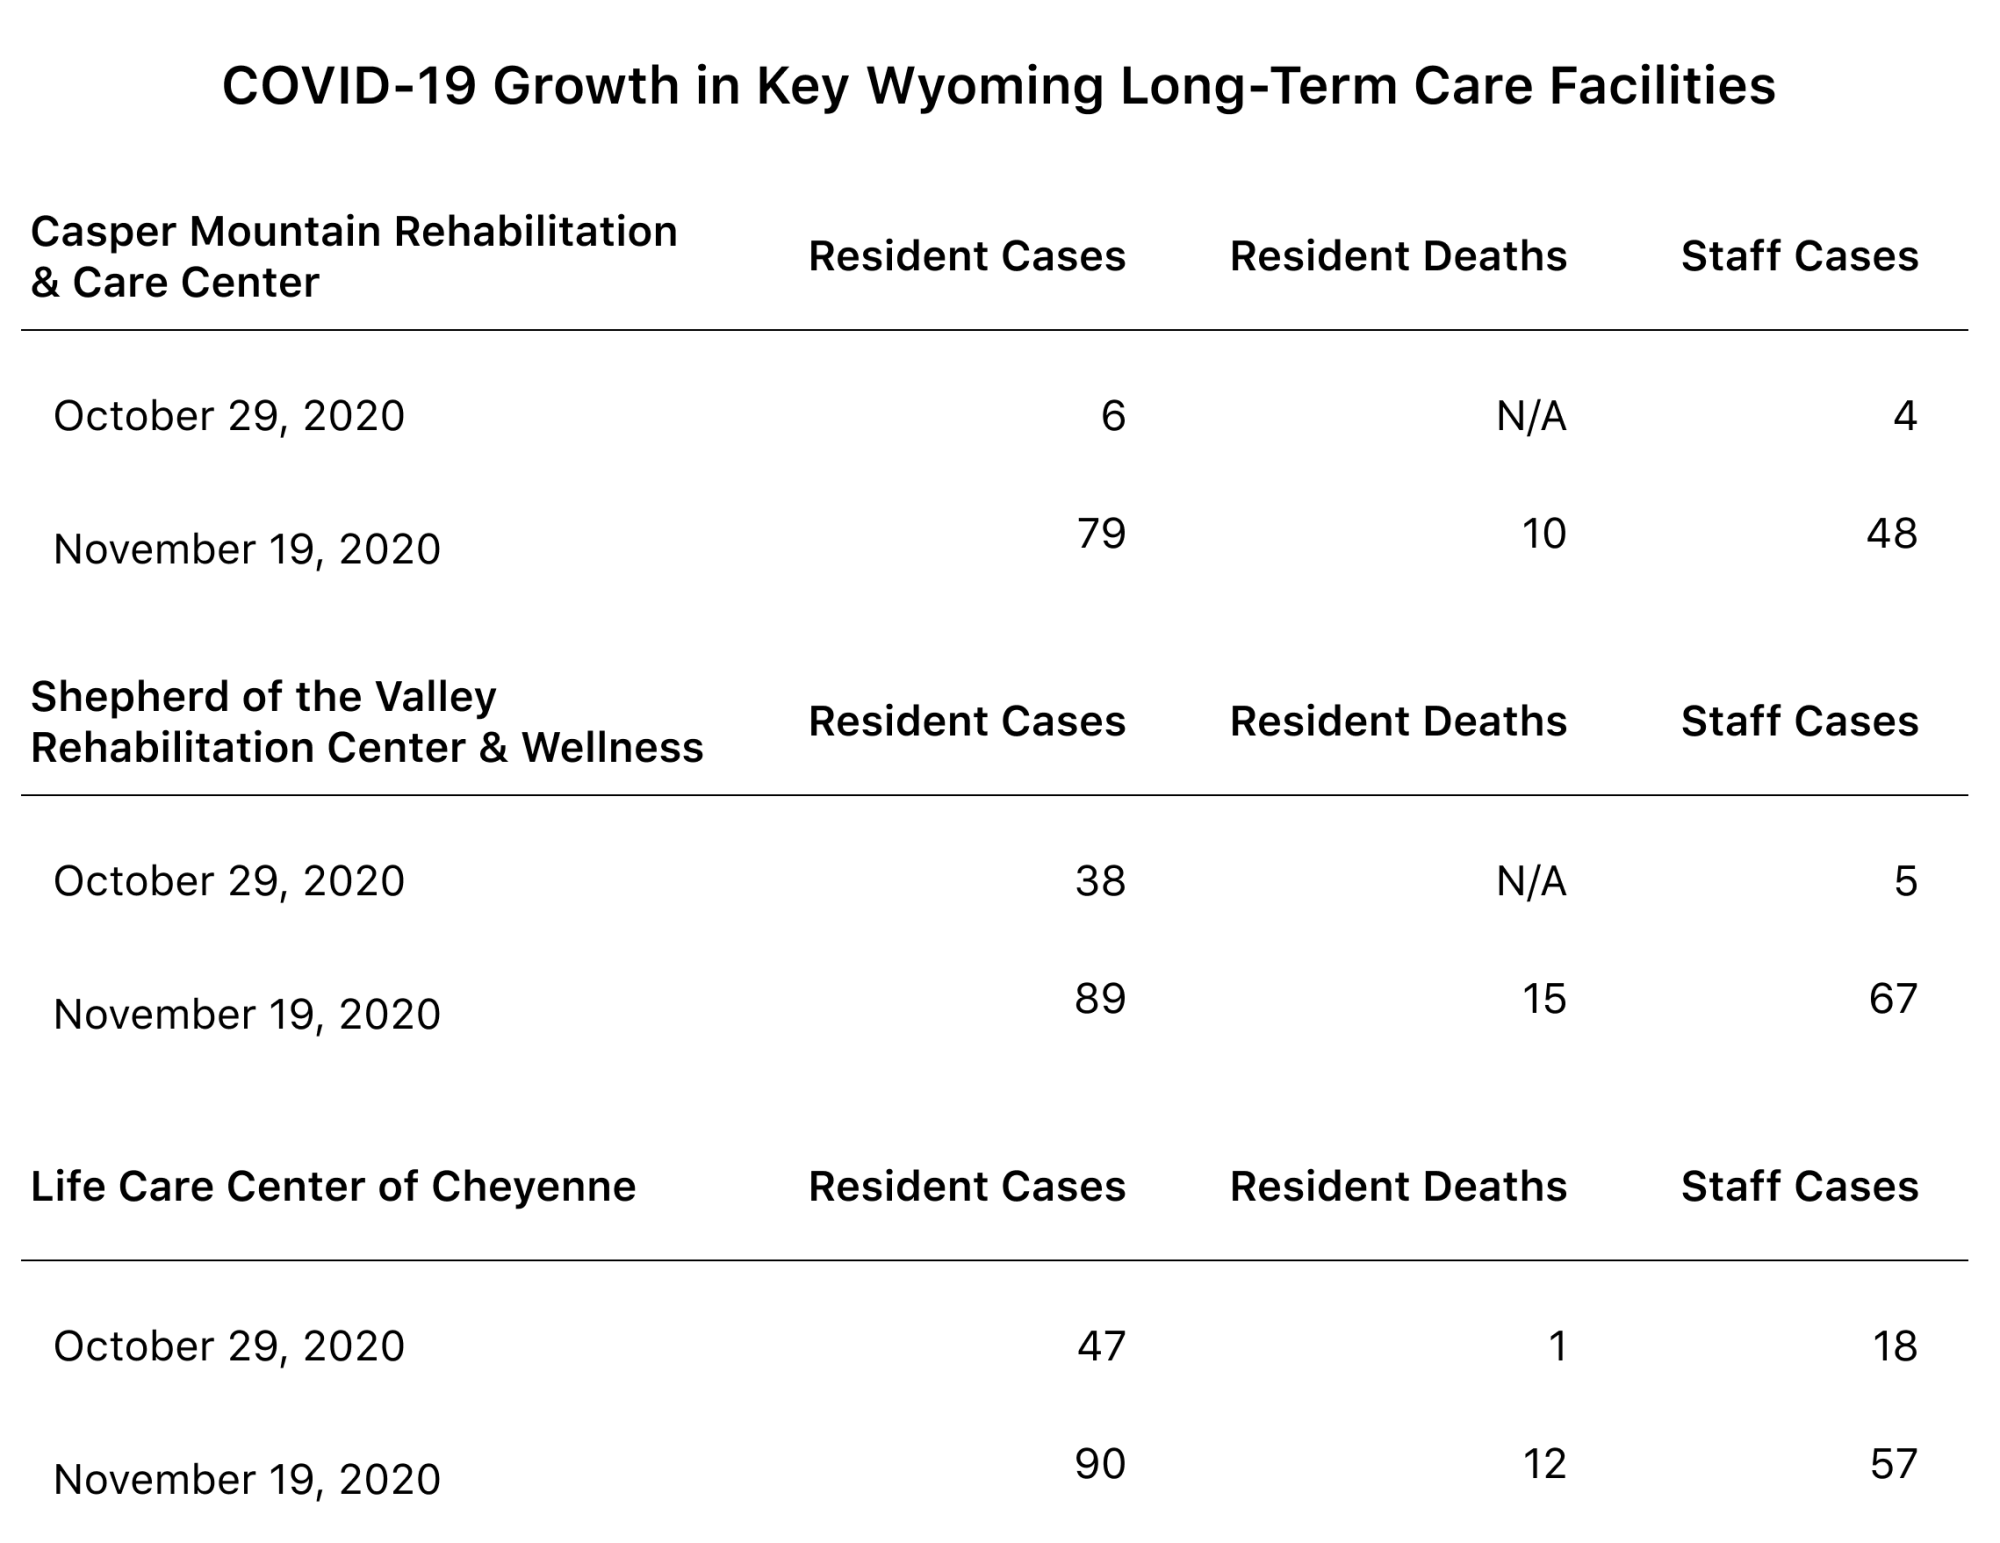 Table showing the growth in COVID-19 cases and deaths in 3 key Wyoming facilities. All three saw sharp increases in both resident cases and resident deaths from October 29 to November 19.